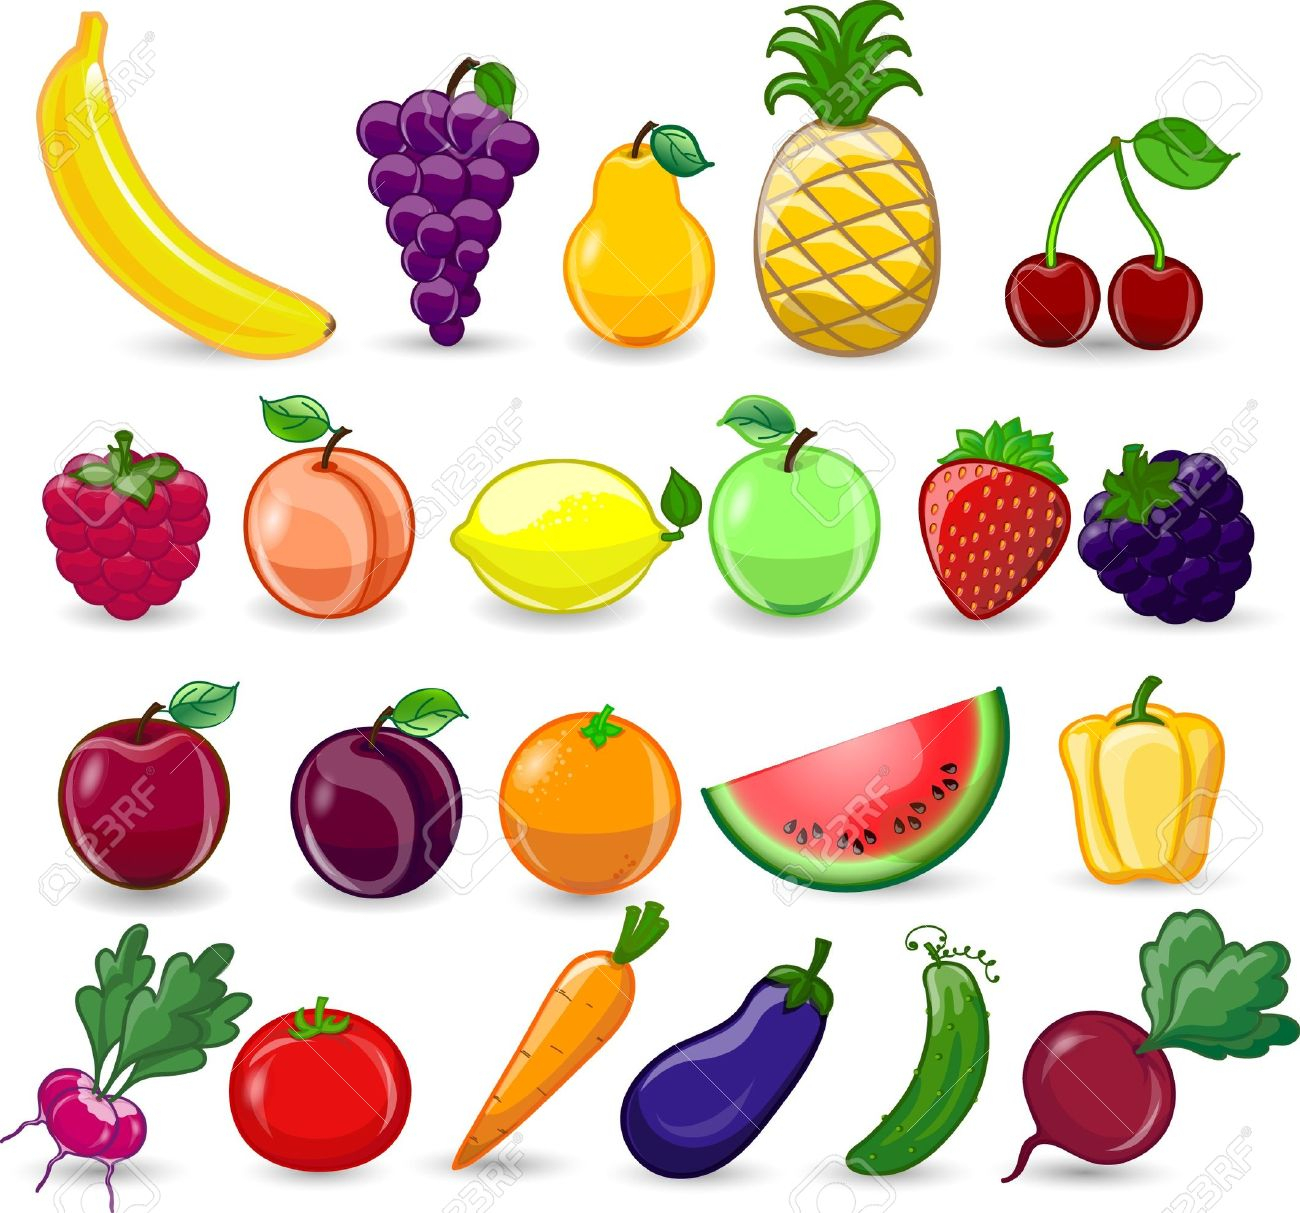 drawing-pictures-of-fruits-and-vegetables-at-getdrawings-free-download